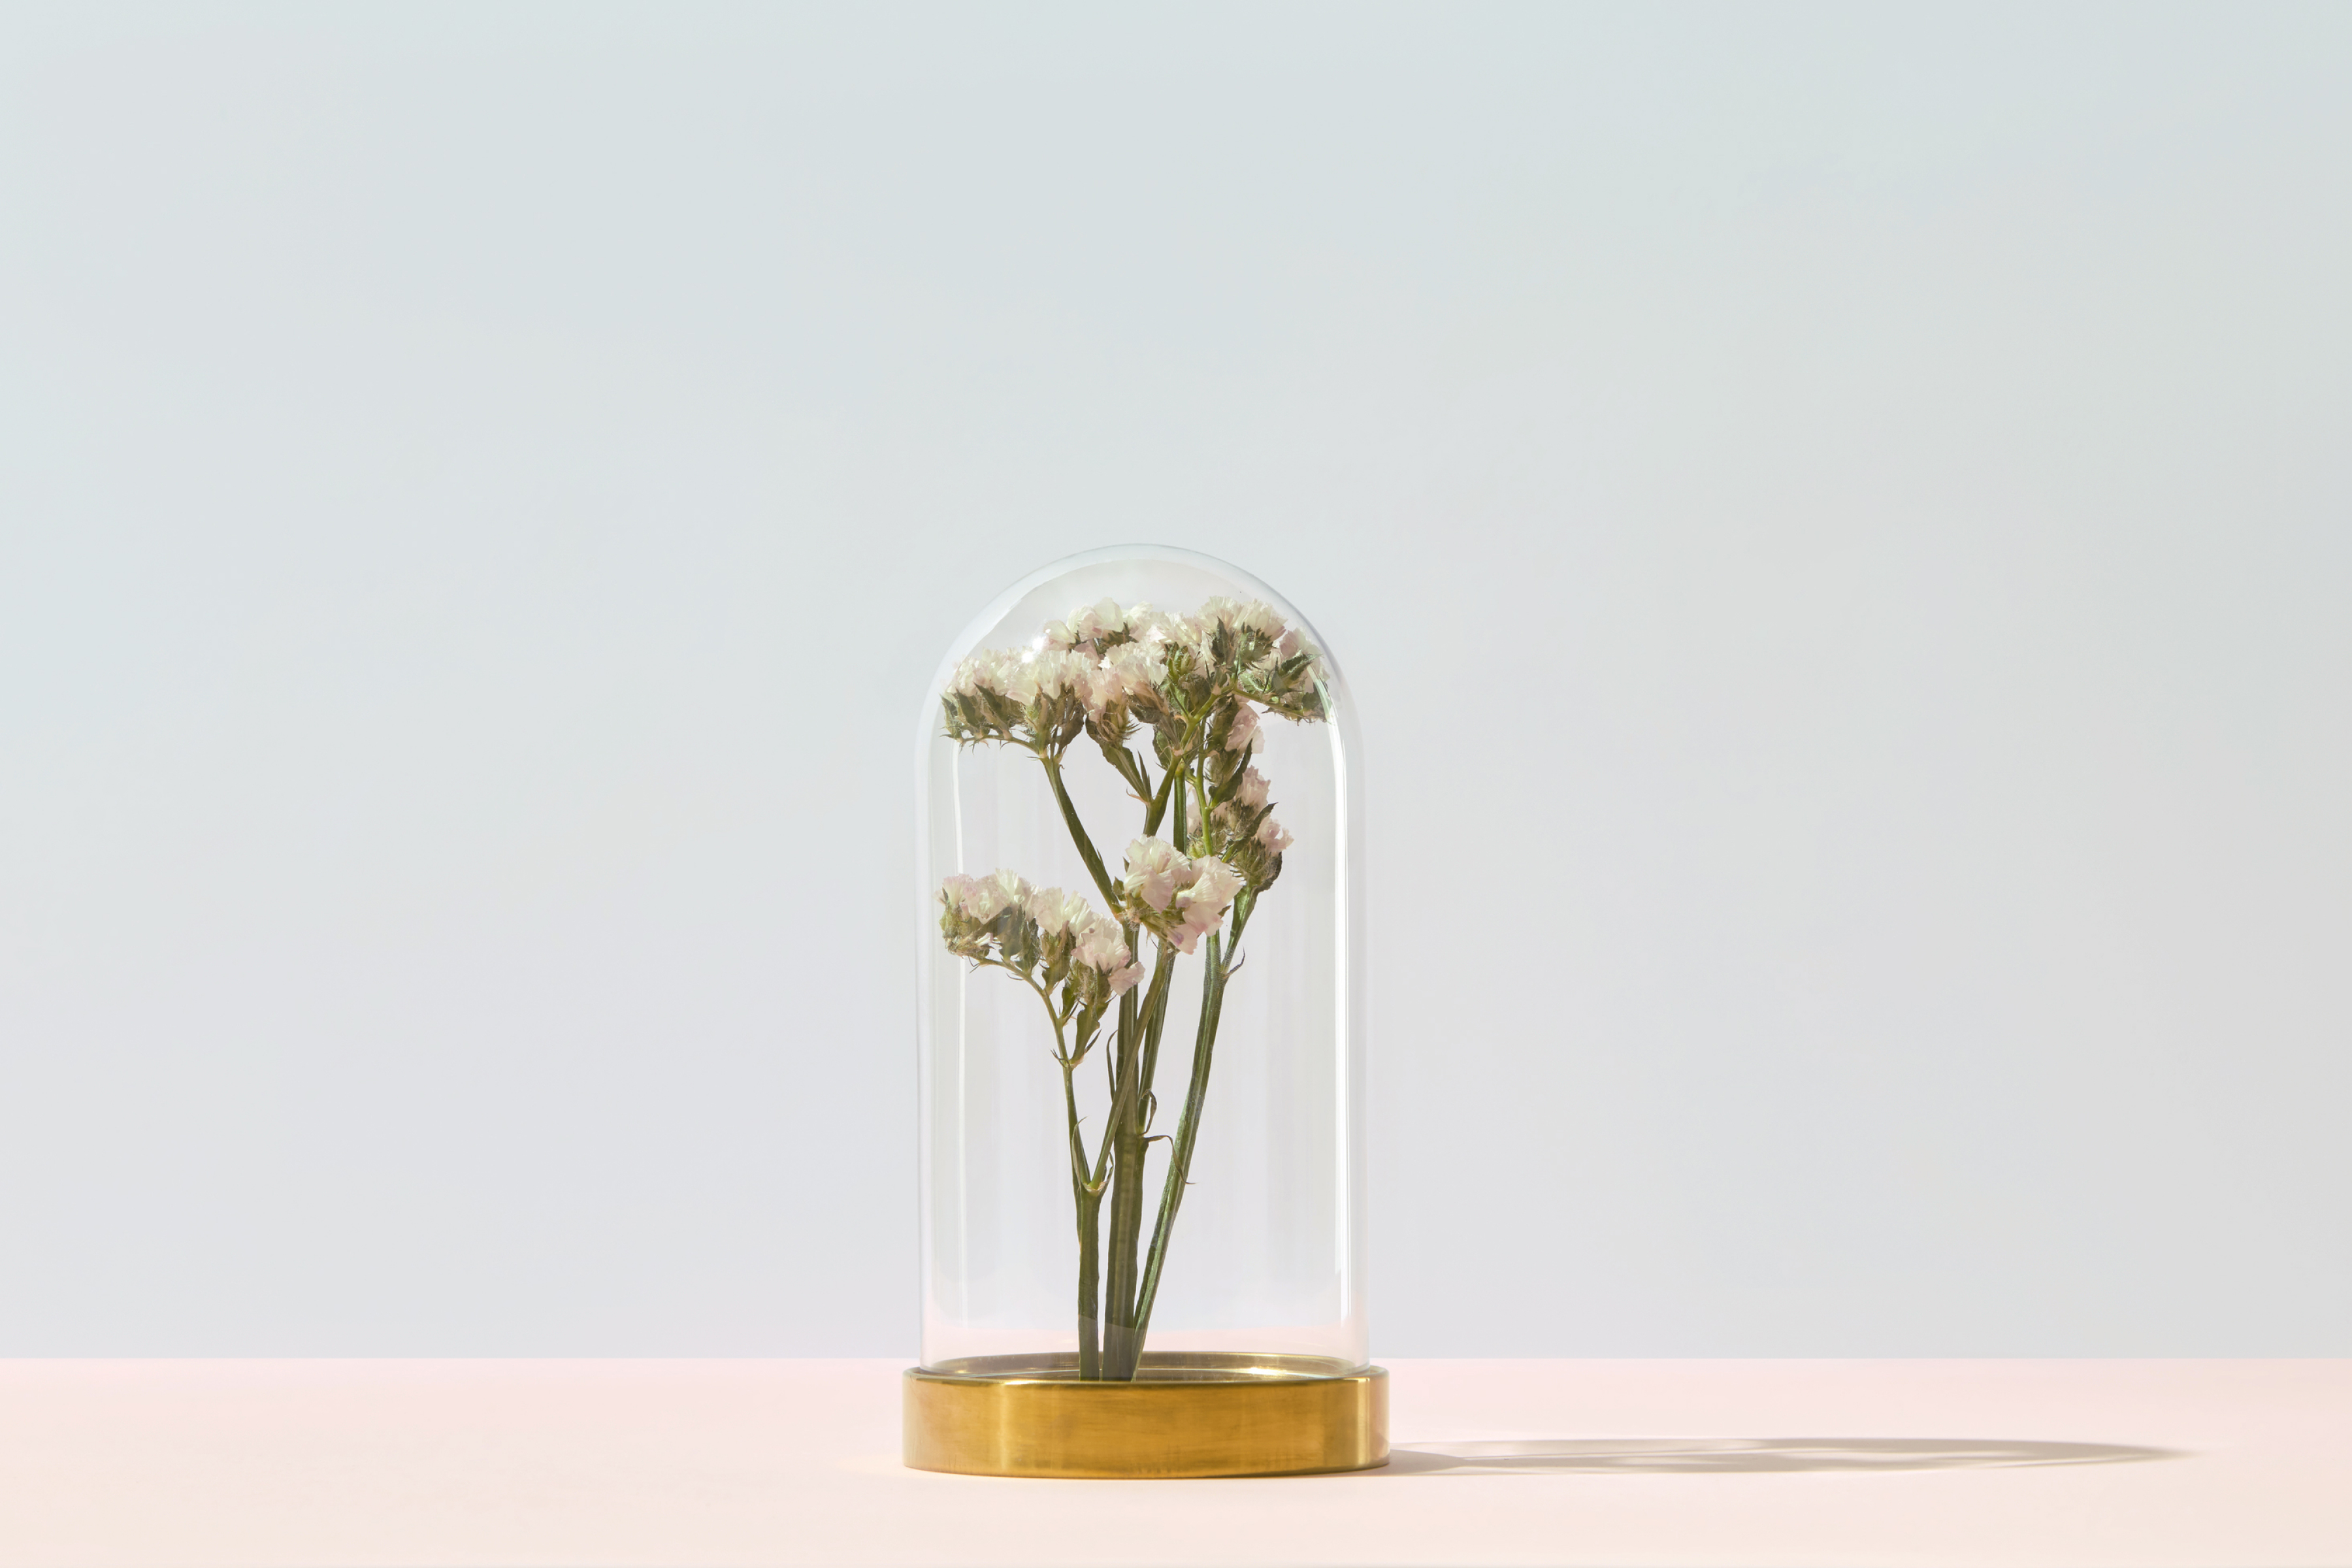 White flowers preserved under a clear glass dome with a brass base on a soft pastel pink and blue background.